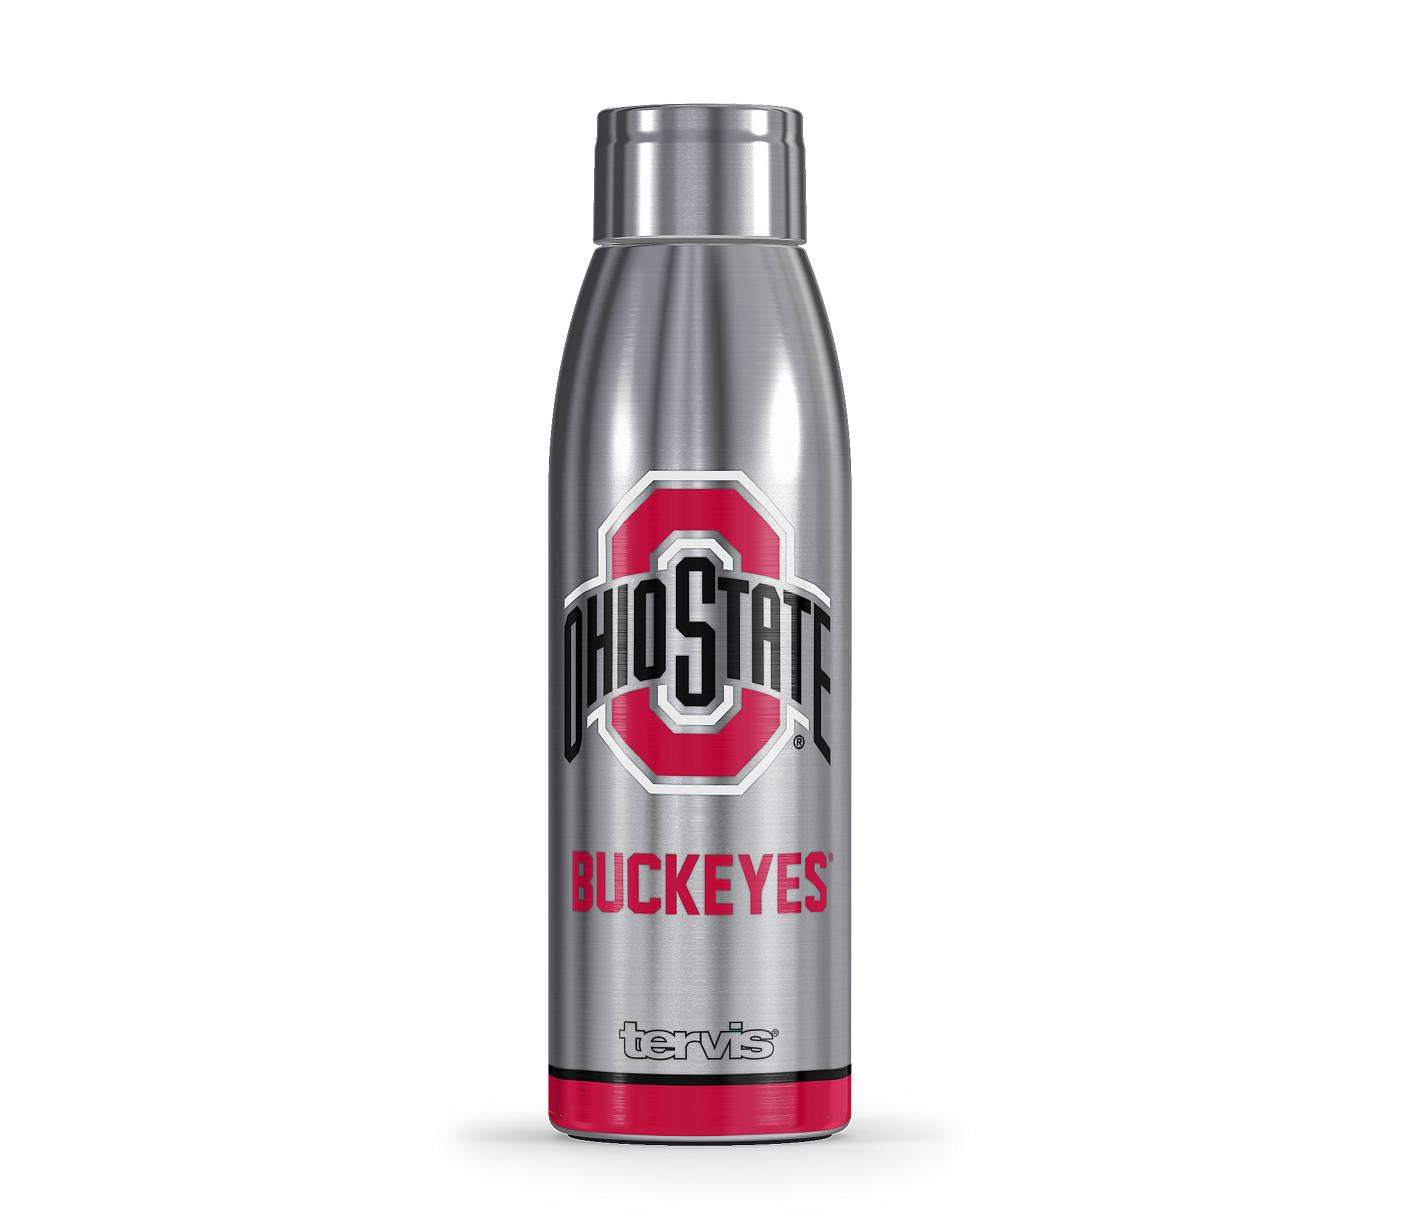 Tervis The Ohio State University Tradition 20 oz. Stainless Steel